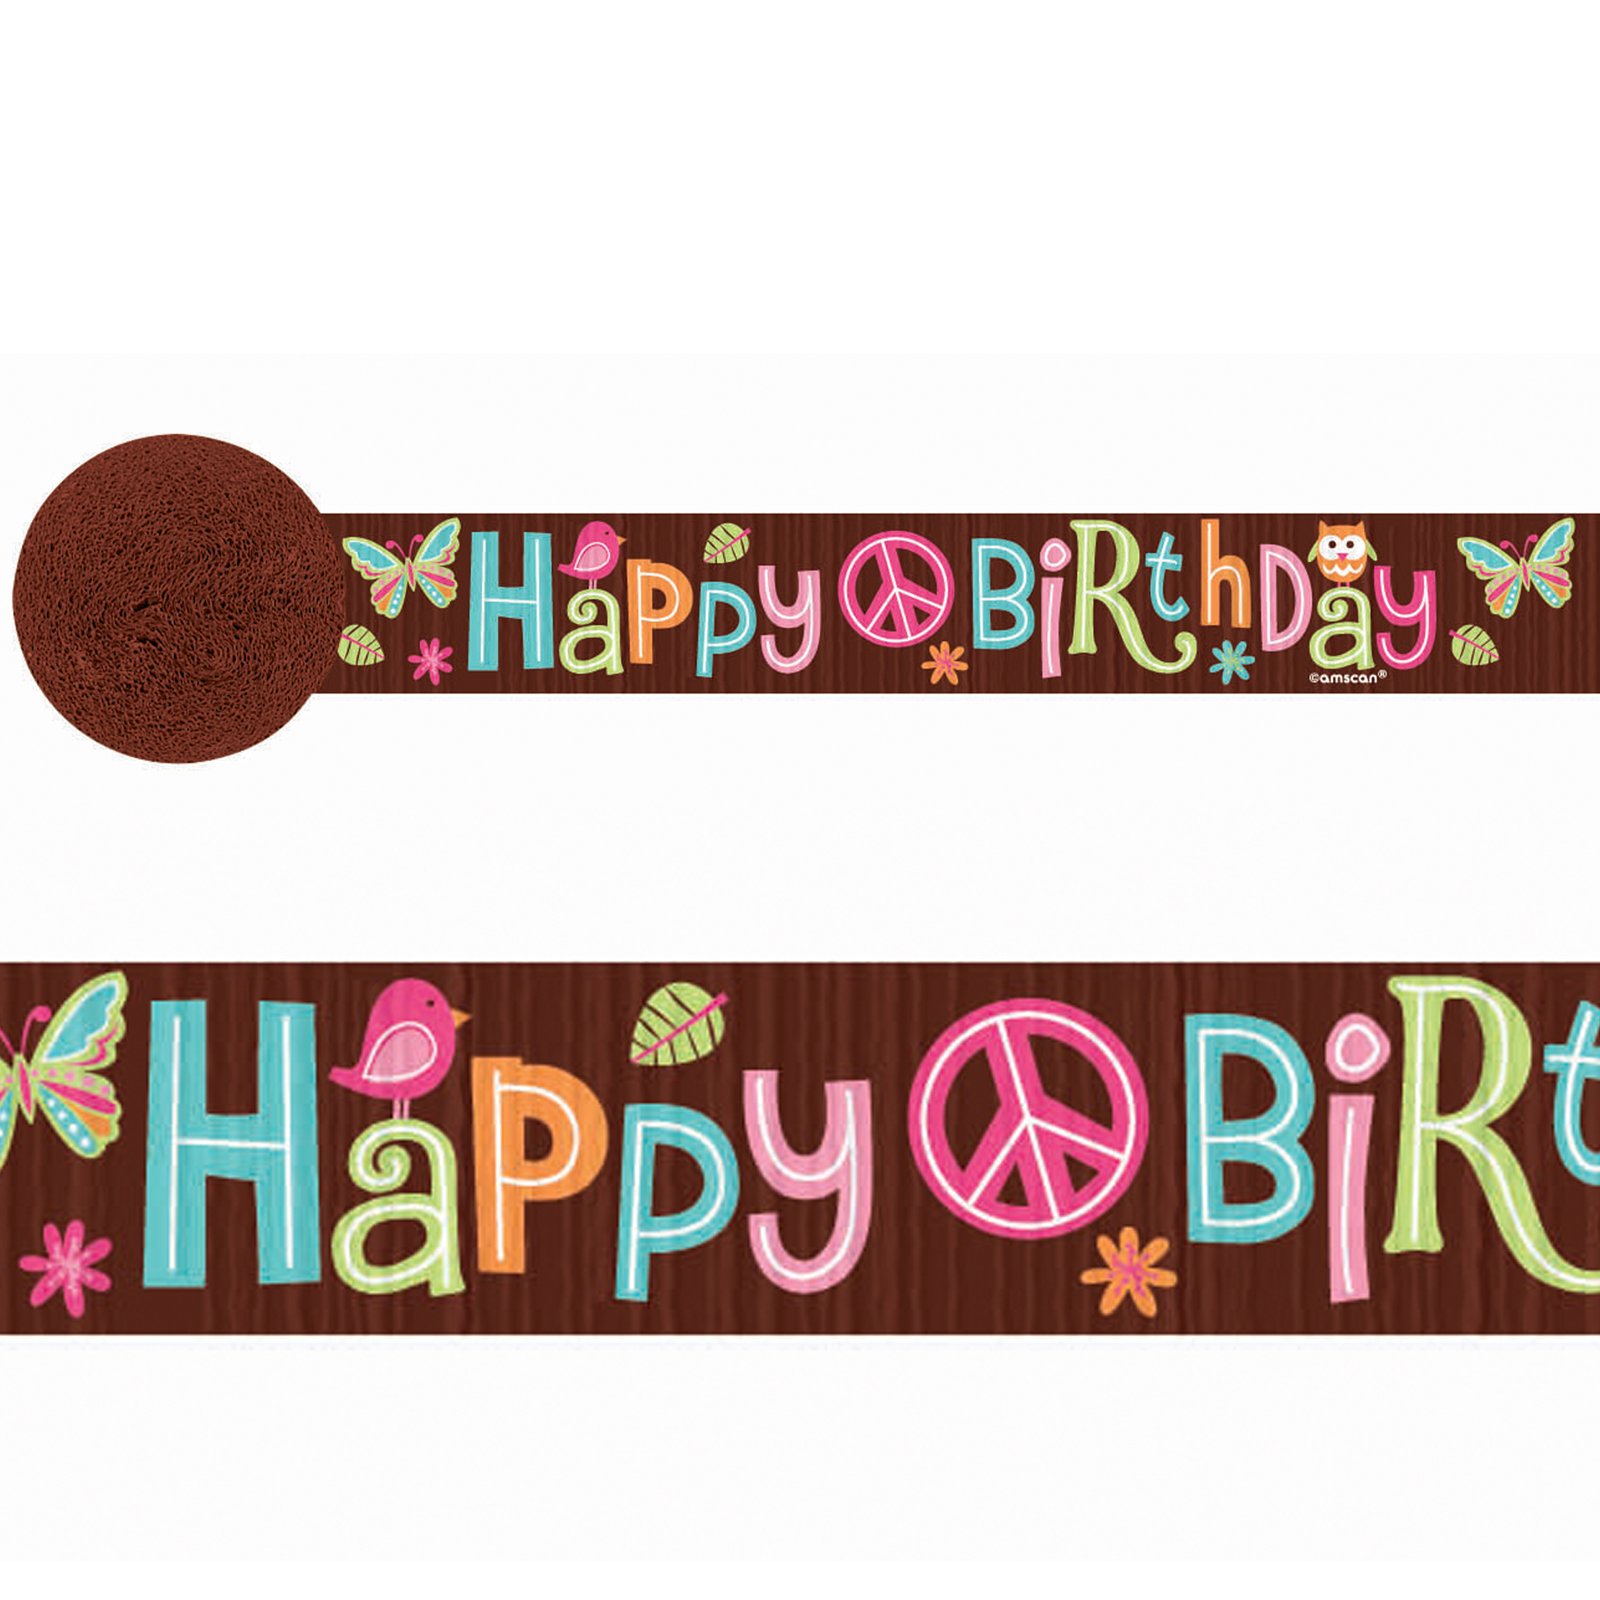 Description: Happy Birthday to a real Hippie Chick! 